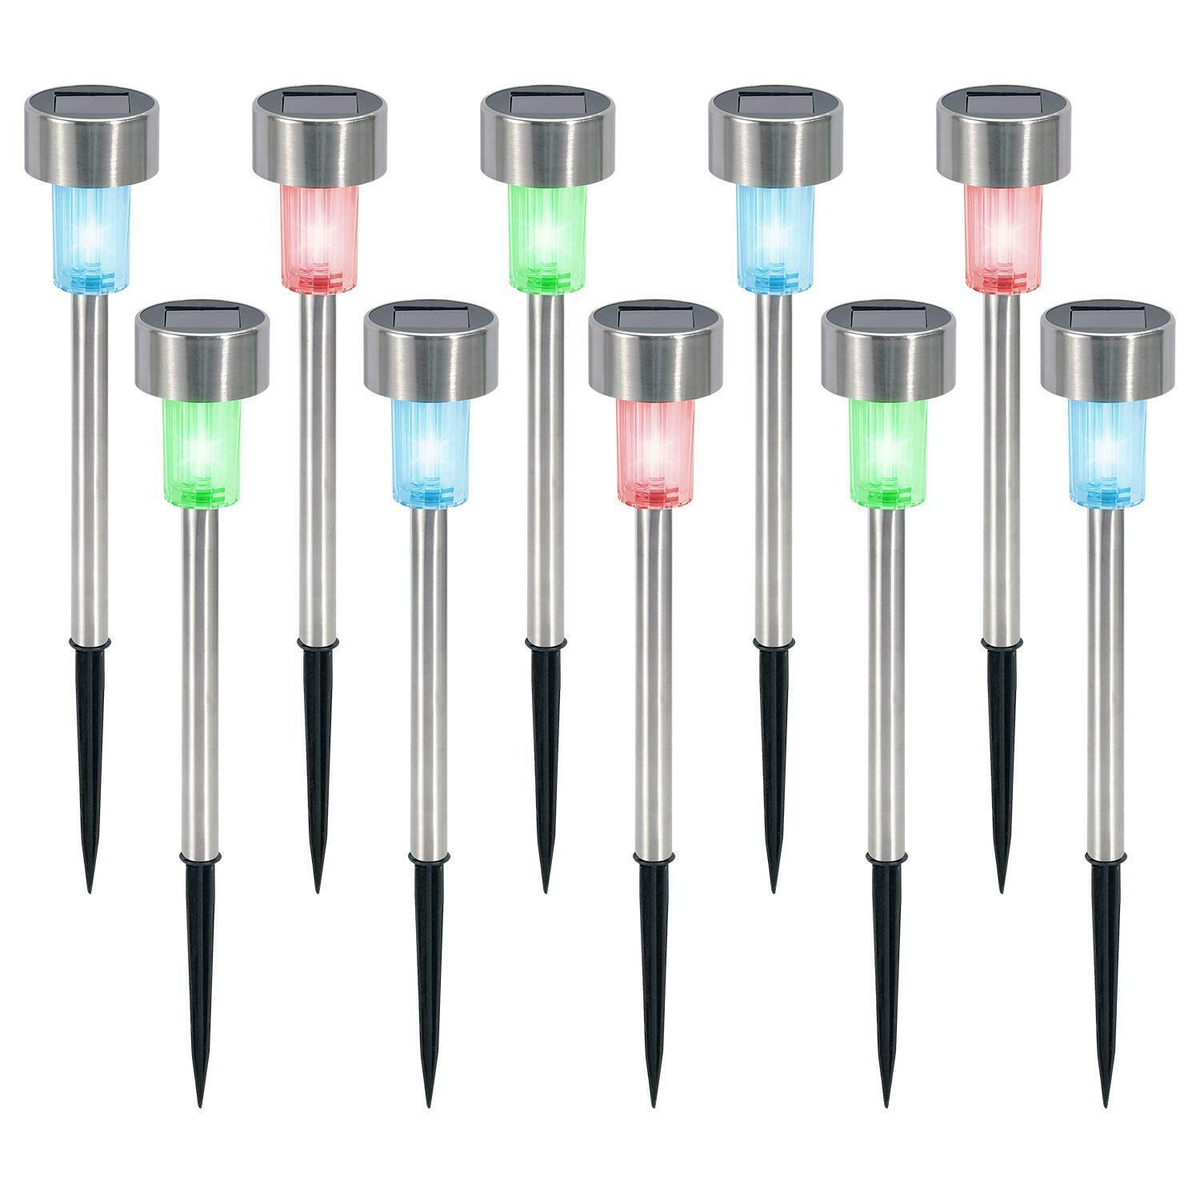 Color Changing Solar Garden Stake Lights - Rechargeable LED Solar Powered Garden Lights - Waterproof Outdoor Lamps - Pack Of 10